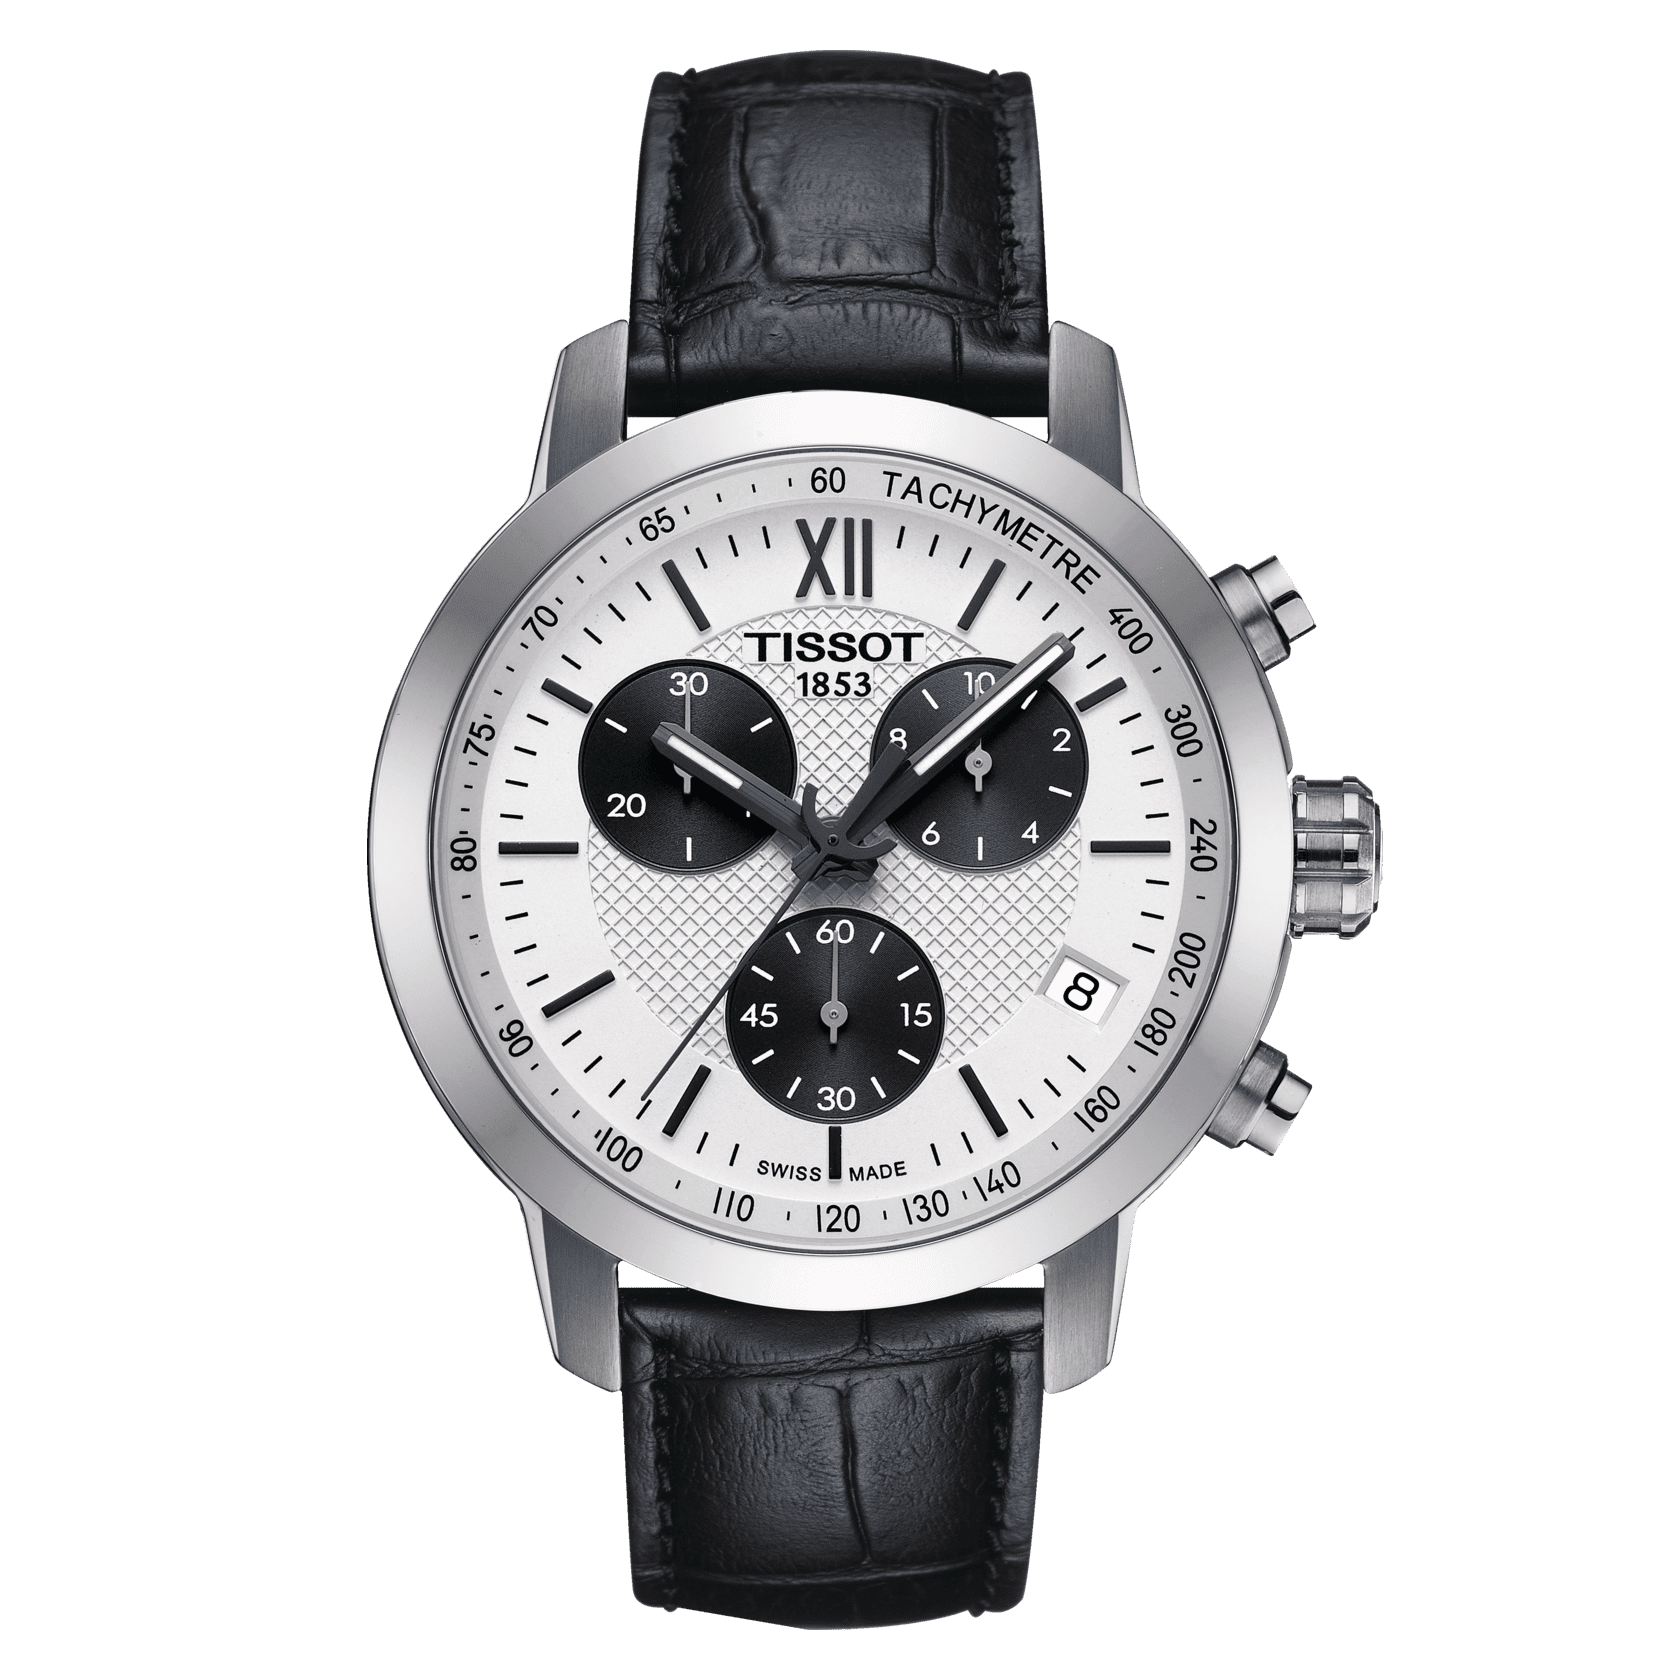 Where To Buy Replica Watches In New York City